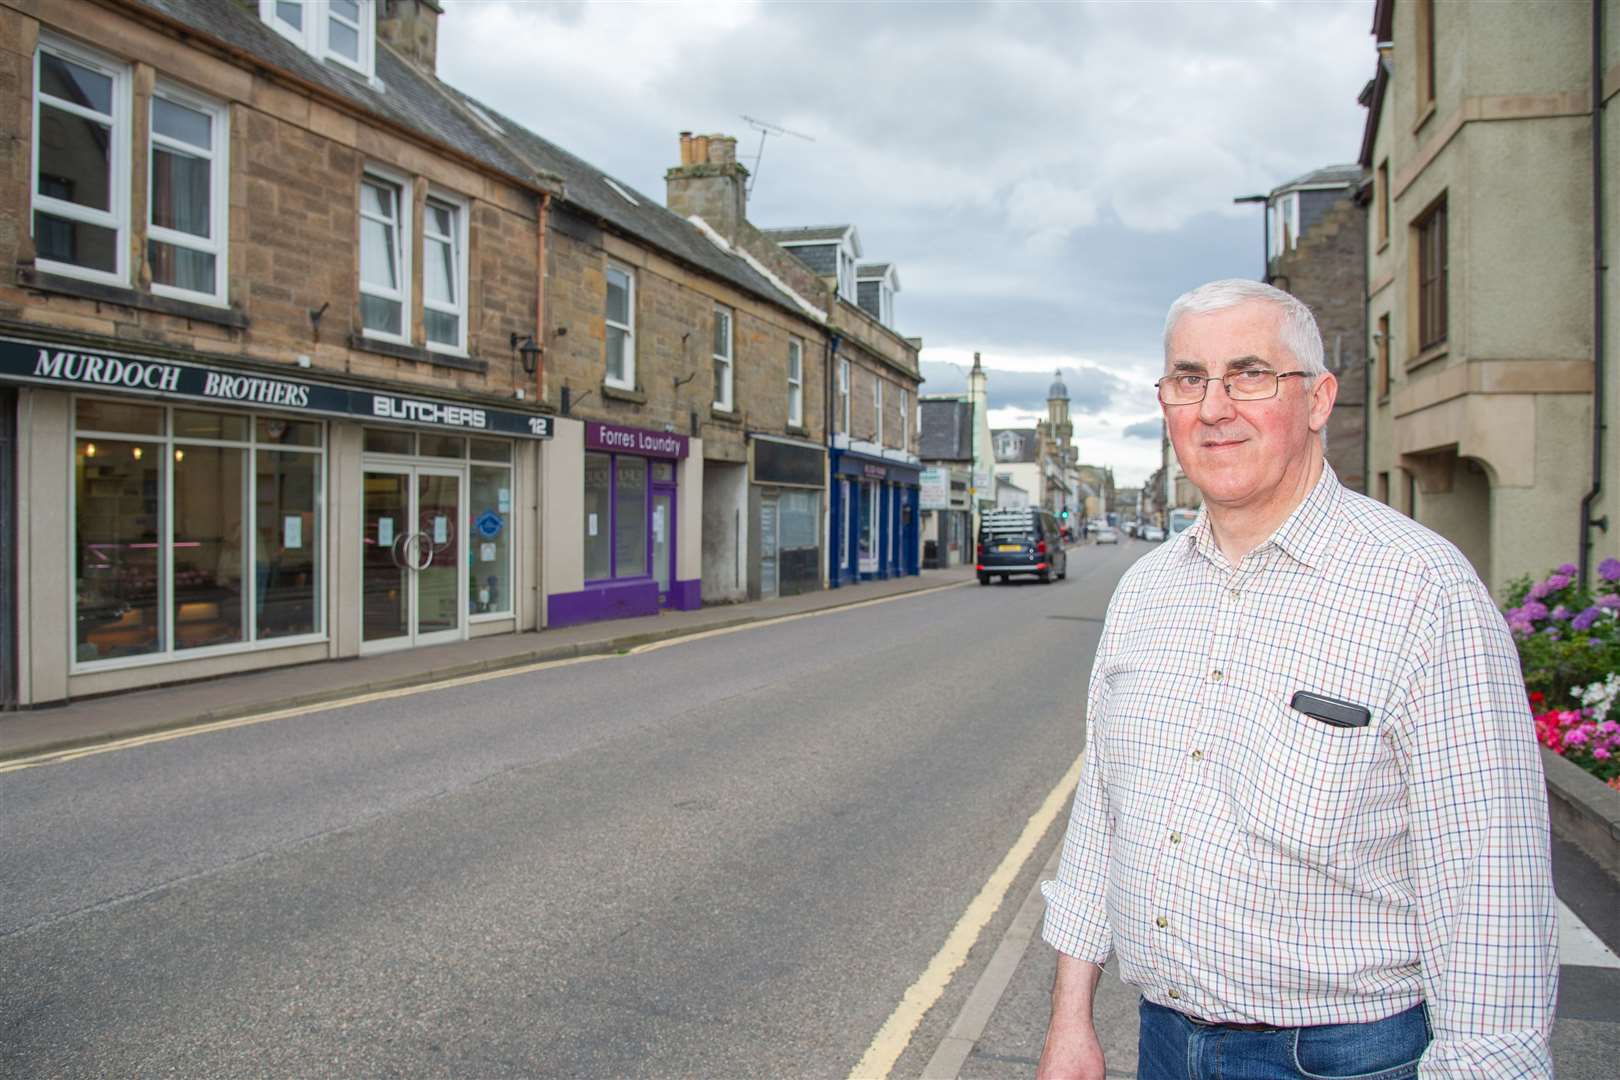 Local butcher Graham Murdoch suggests that revising town centre parking restrictions may help increase footfall.